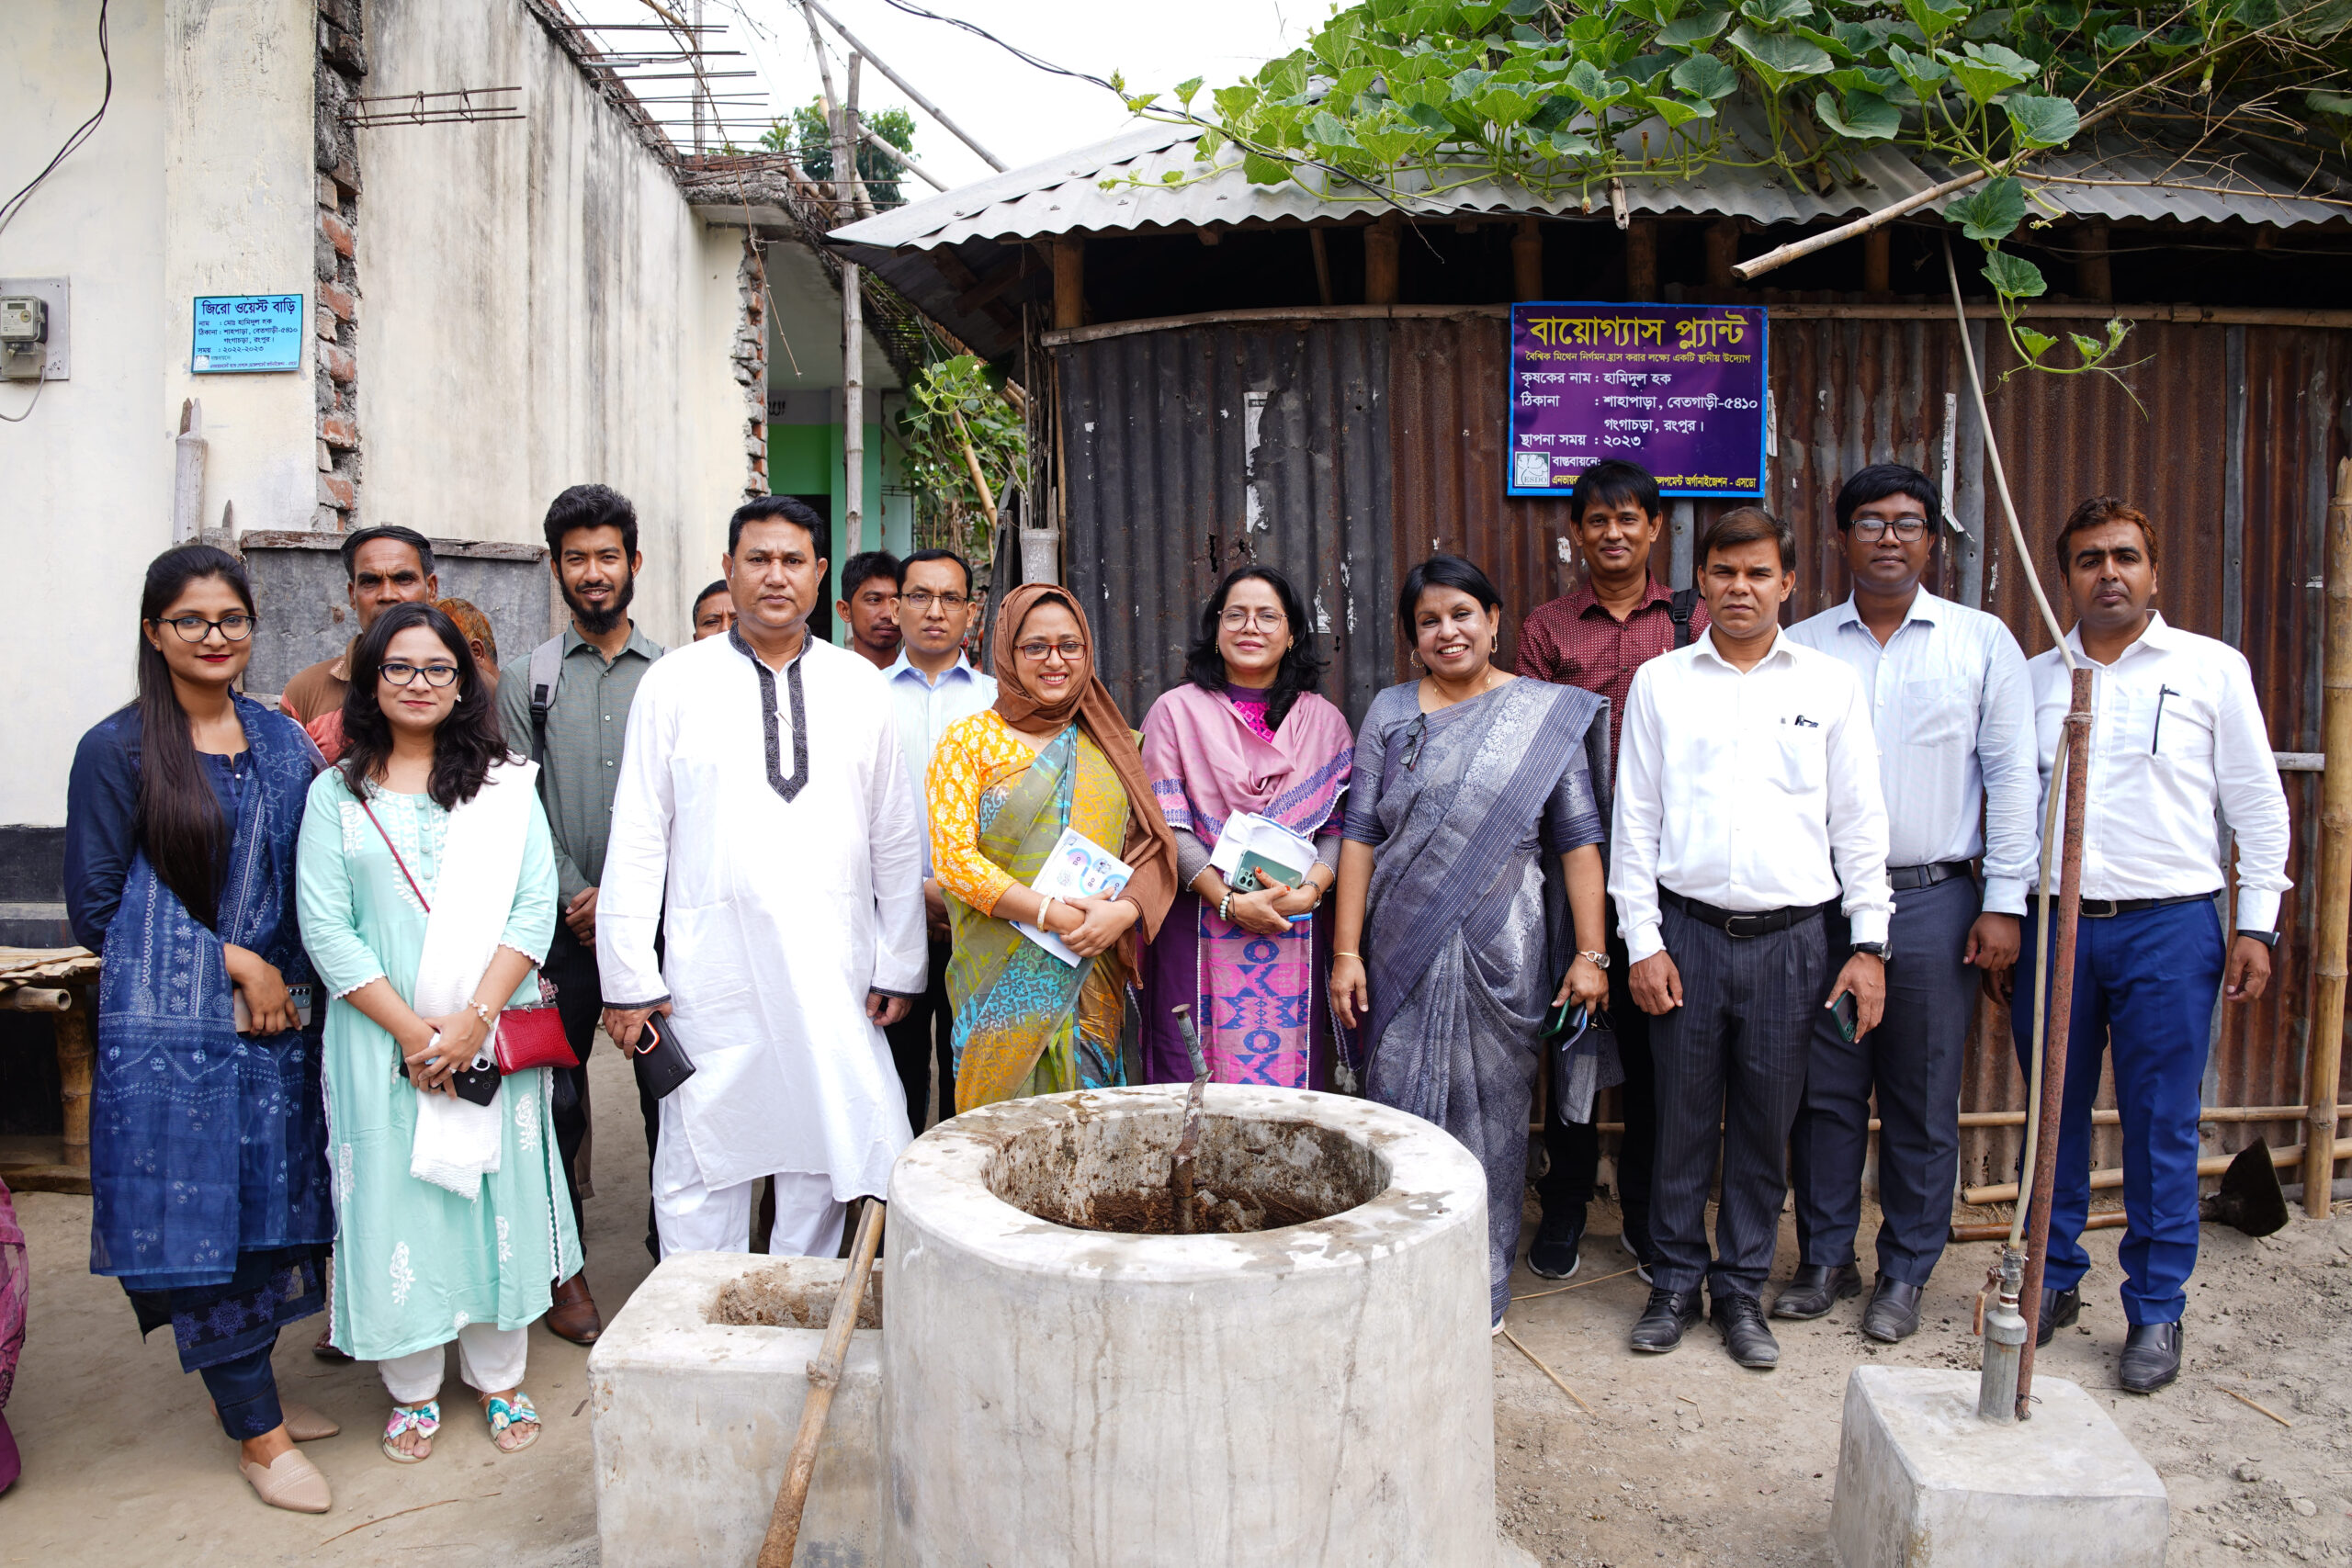 You are currently viewing A Visit by the Additional Secretary of Ministry of Environment, Forest and Climate Change (MoEFCC), Bangladesh at ESDO Zero-Waste Village in Betgari, Rangpur